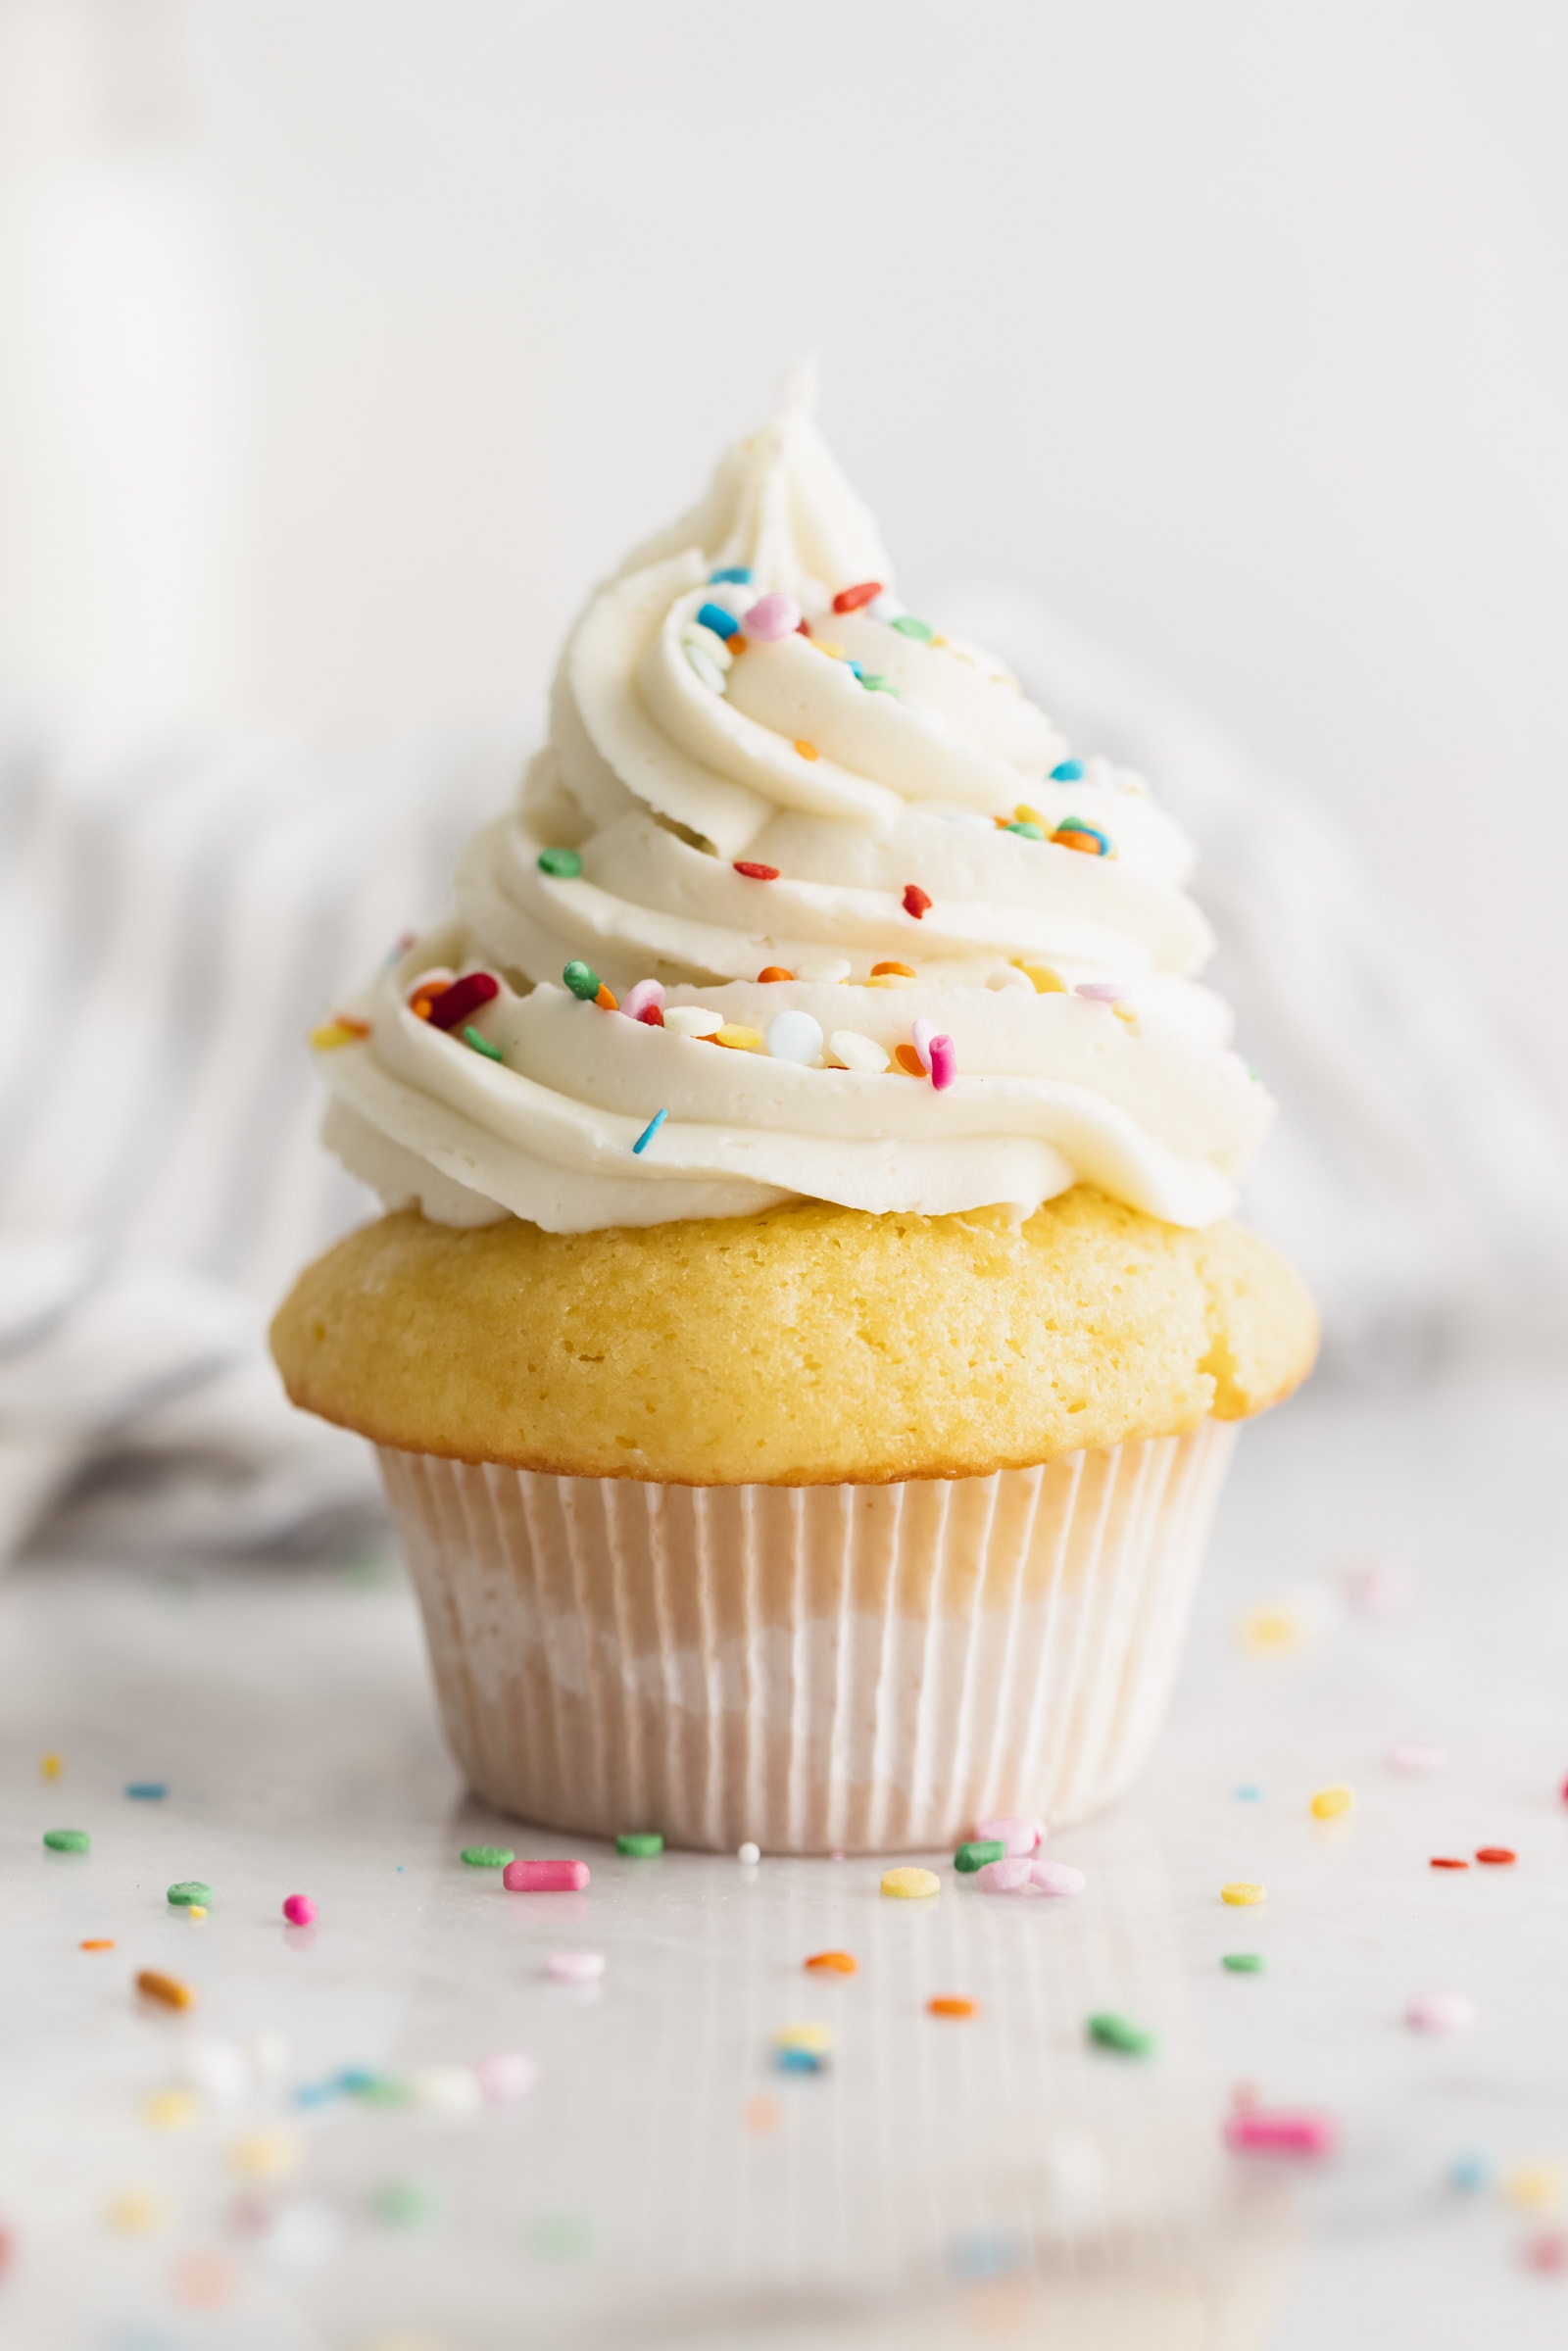 10 Perfectly Sweet Cupcake Recipes (Because Cupcakes Are Still Awesome)